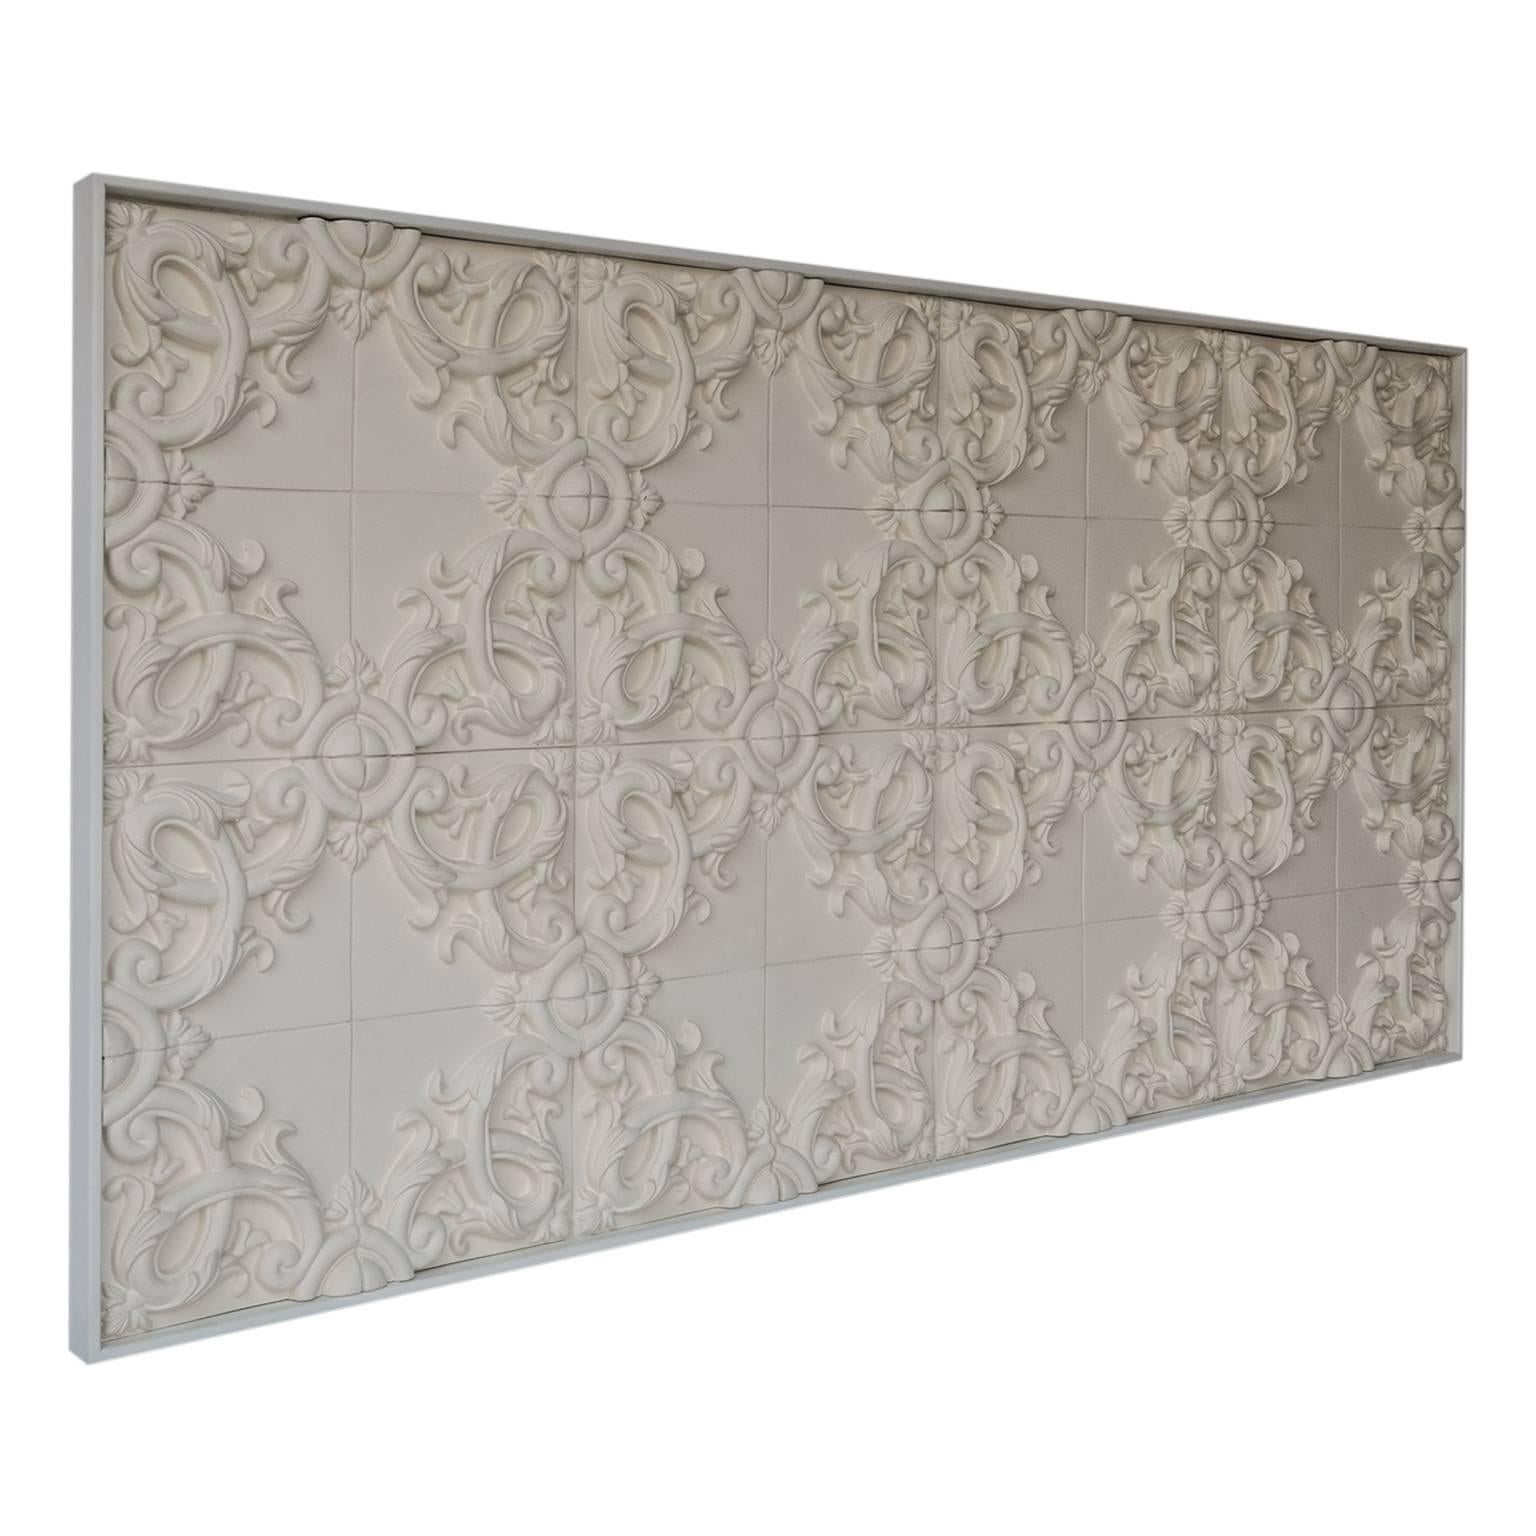 Painted Decorative Panel in Three-Dimensional Baroque Ceramic, Customizable, Acanto For Sale